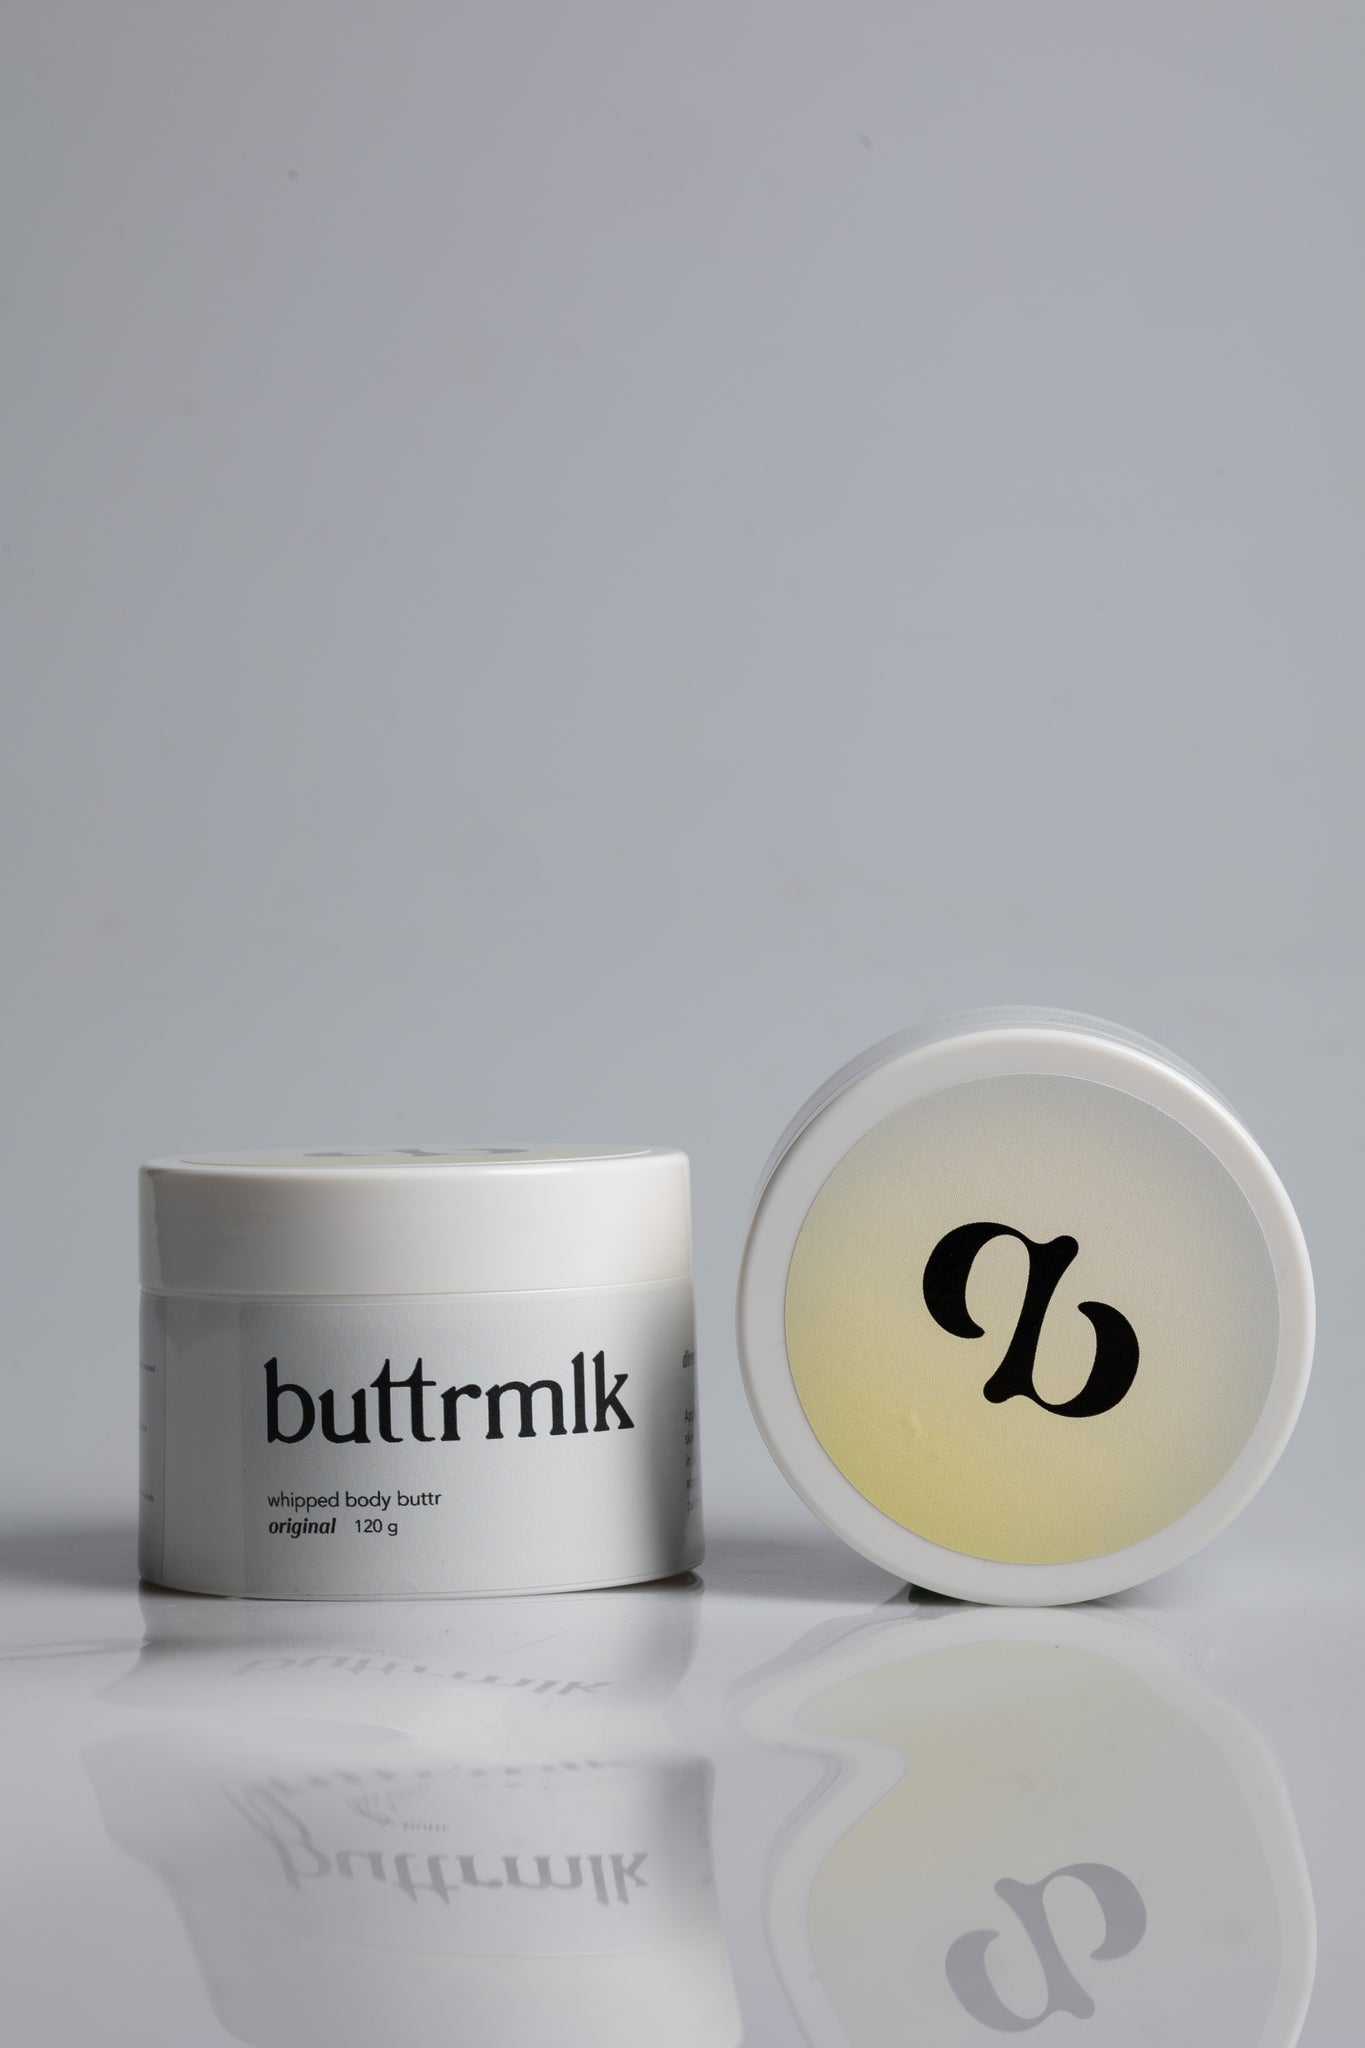 Whipped Body Buttr- Original